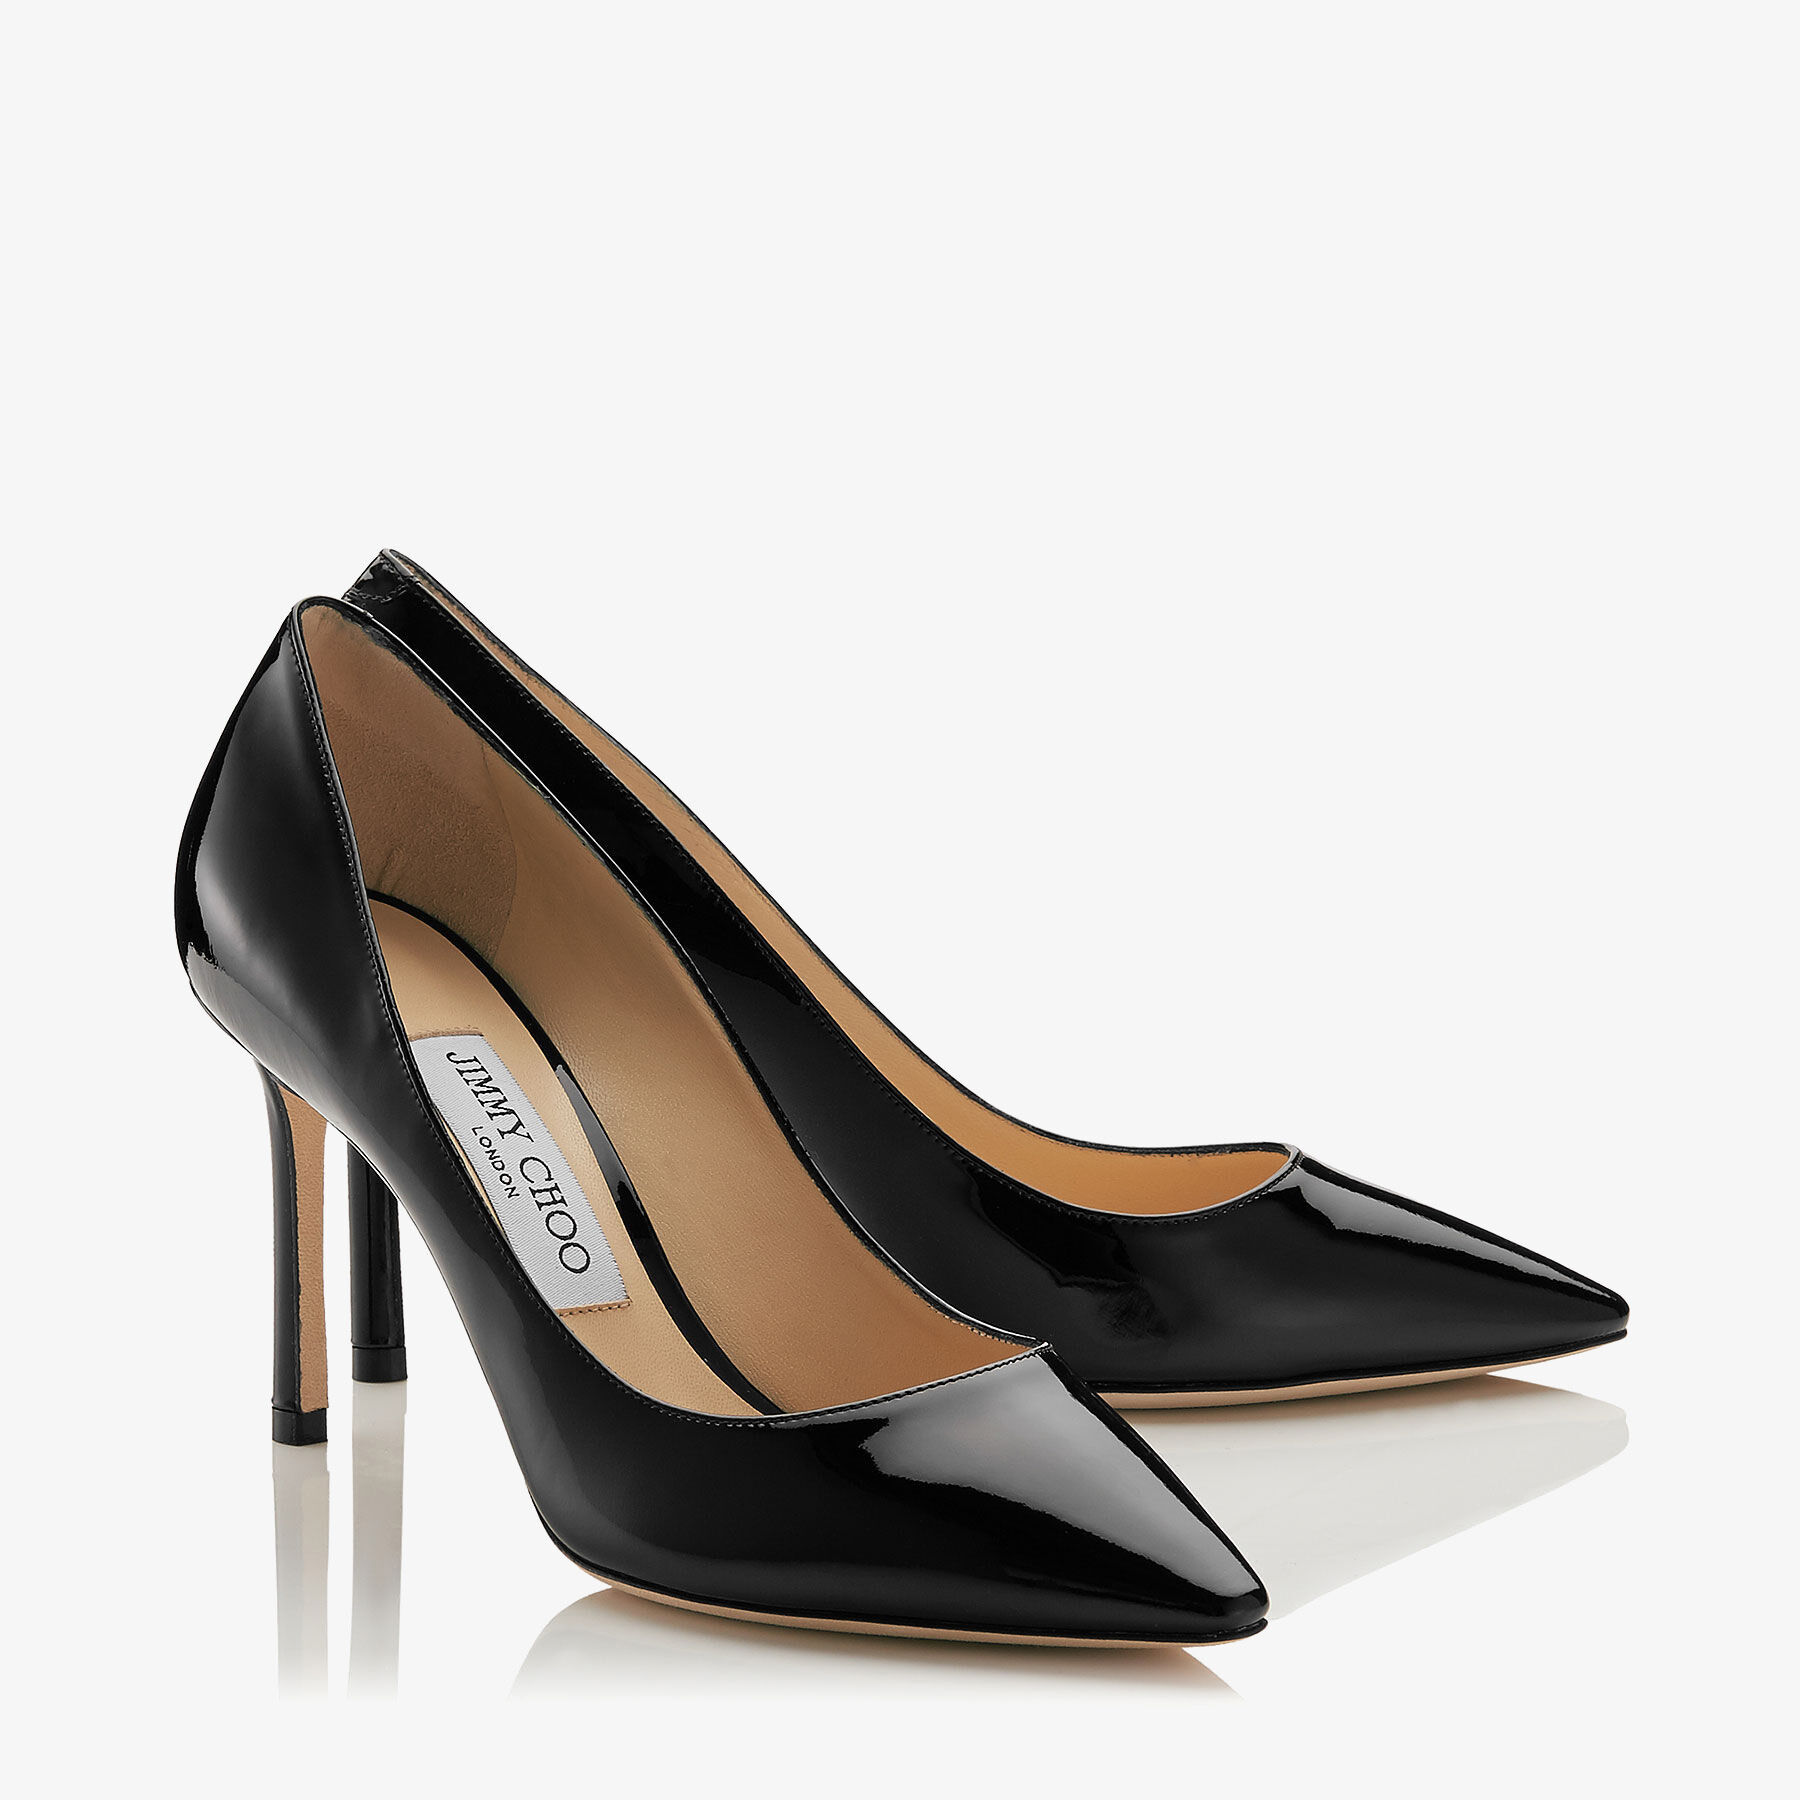 Jimmy Choo Romy 85 Pumps in Black Patent Leather